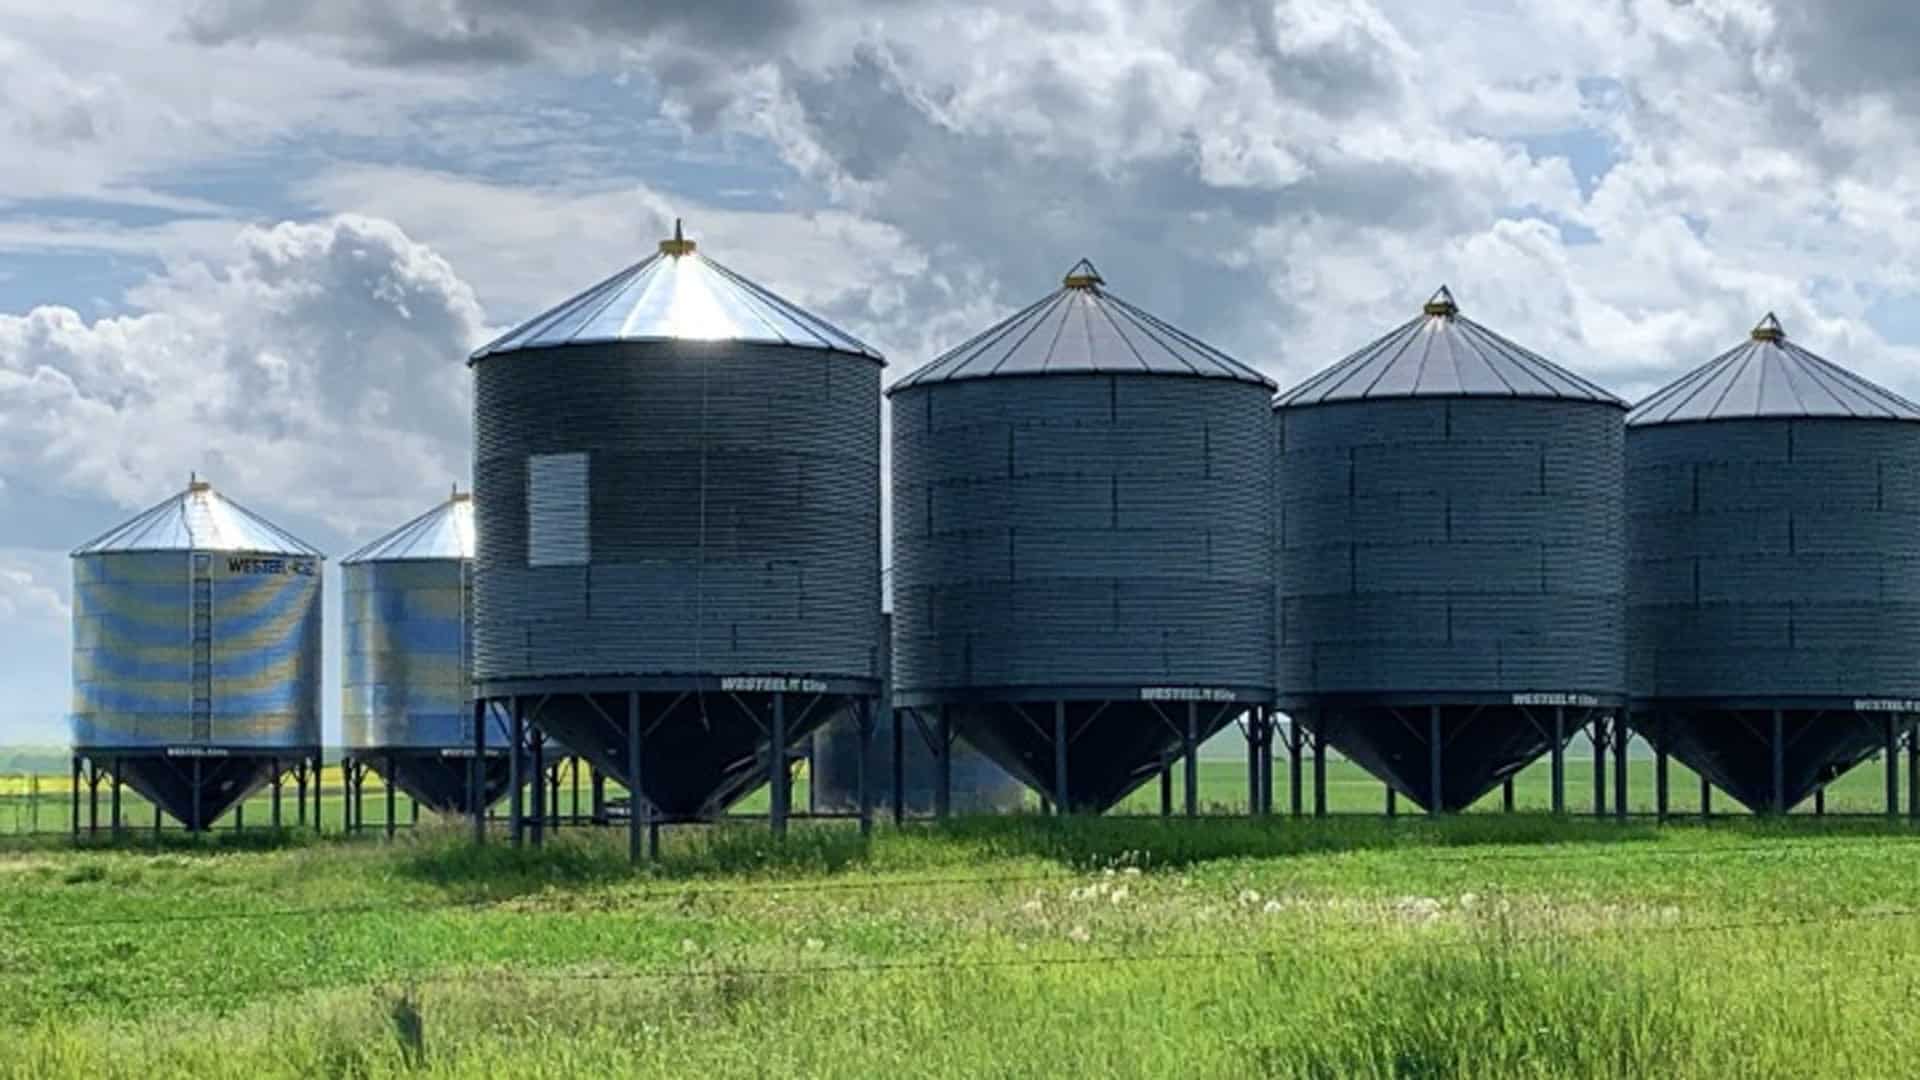 An image of silos in a field to visually demonstrate how SEO silo structure organizes contents, much like grain silos organize different grains..